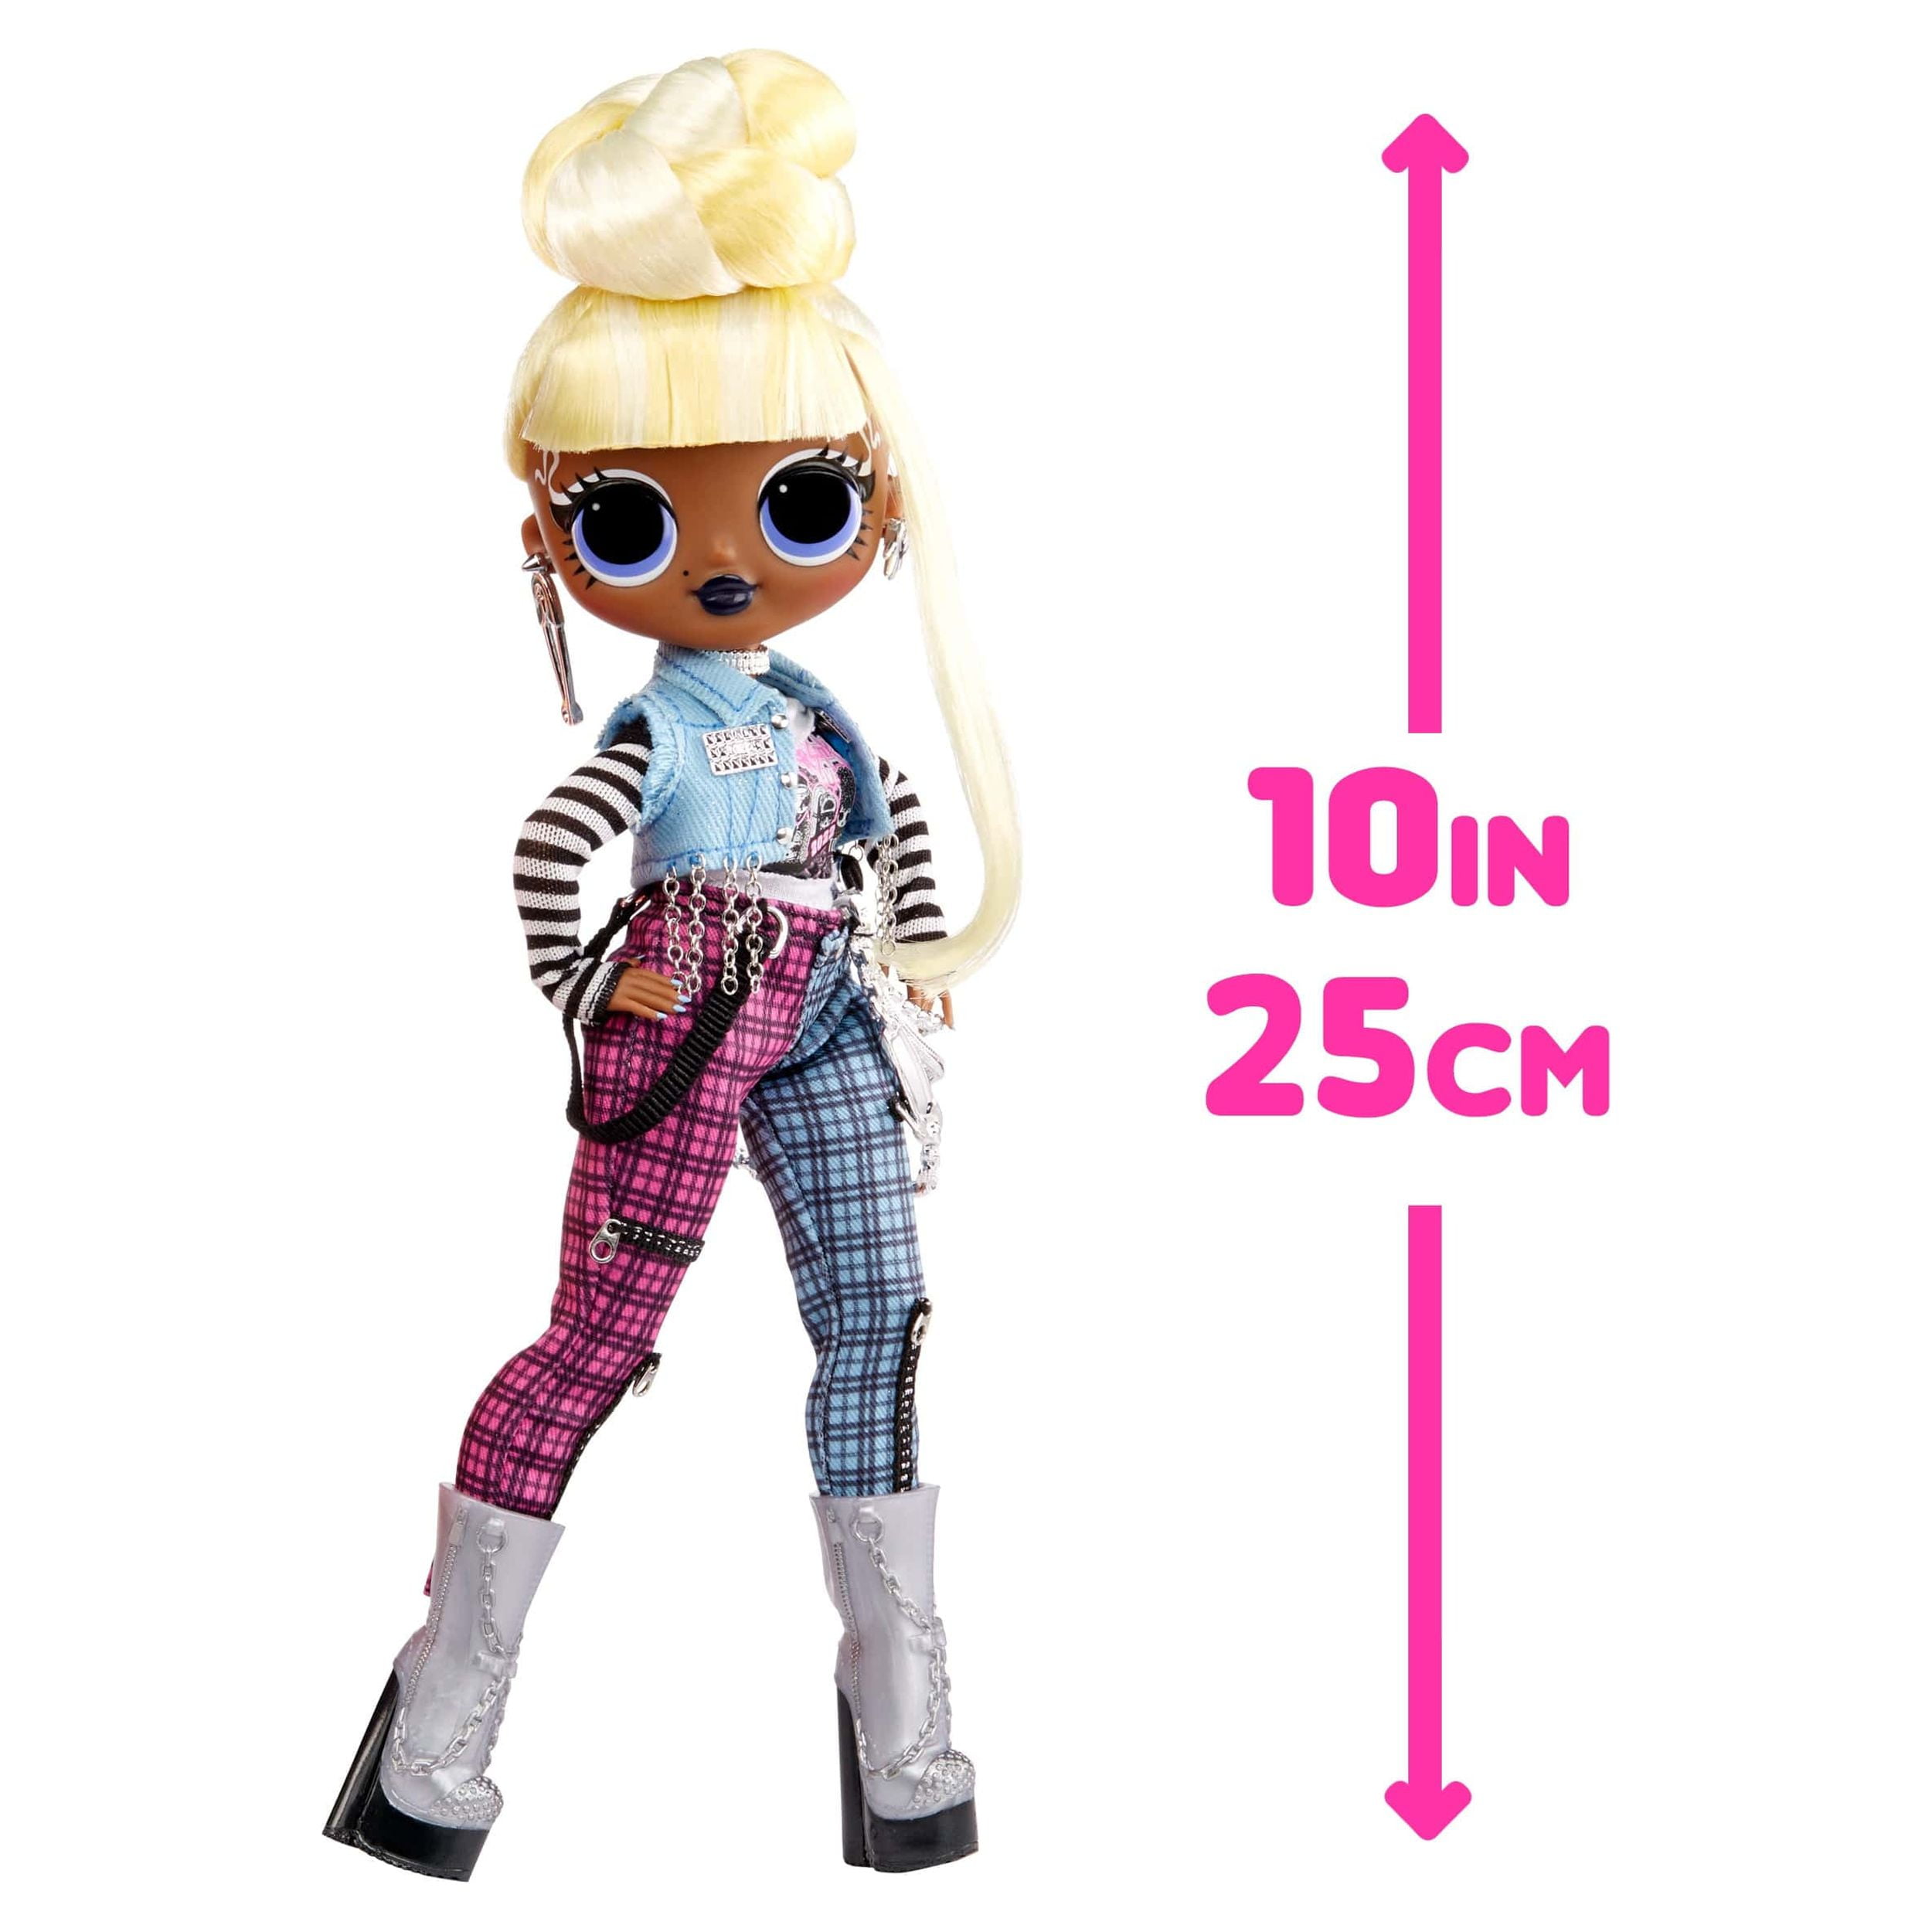 LOL Surprise! OMG Melrose Fashion Doll with 20 Surprises Including  Accessories in Stylish Outfit, Holiday Toy Great Gift for Kids Girls Boys  Ages 4 5